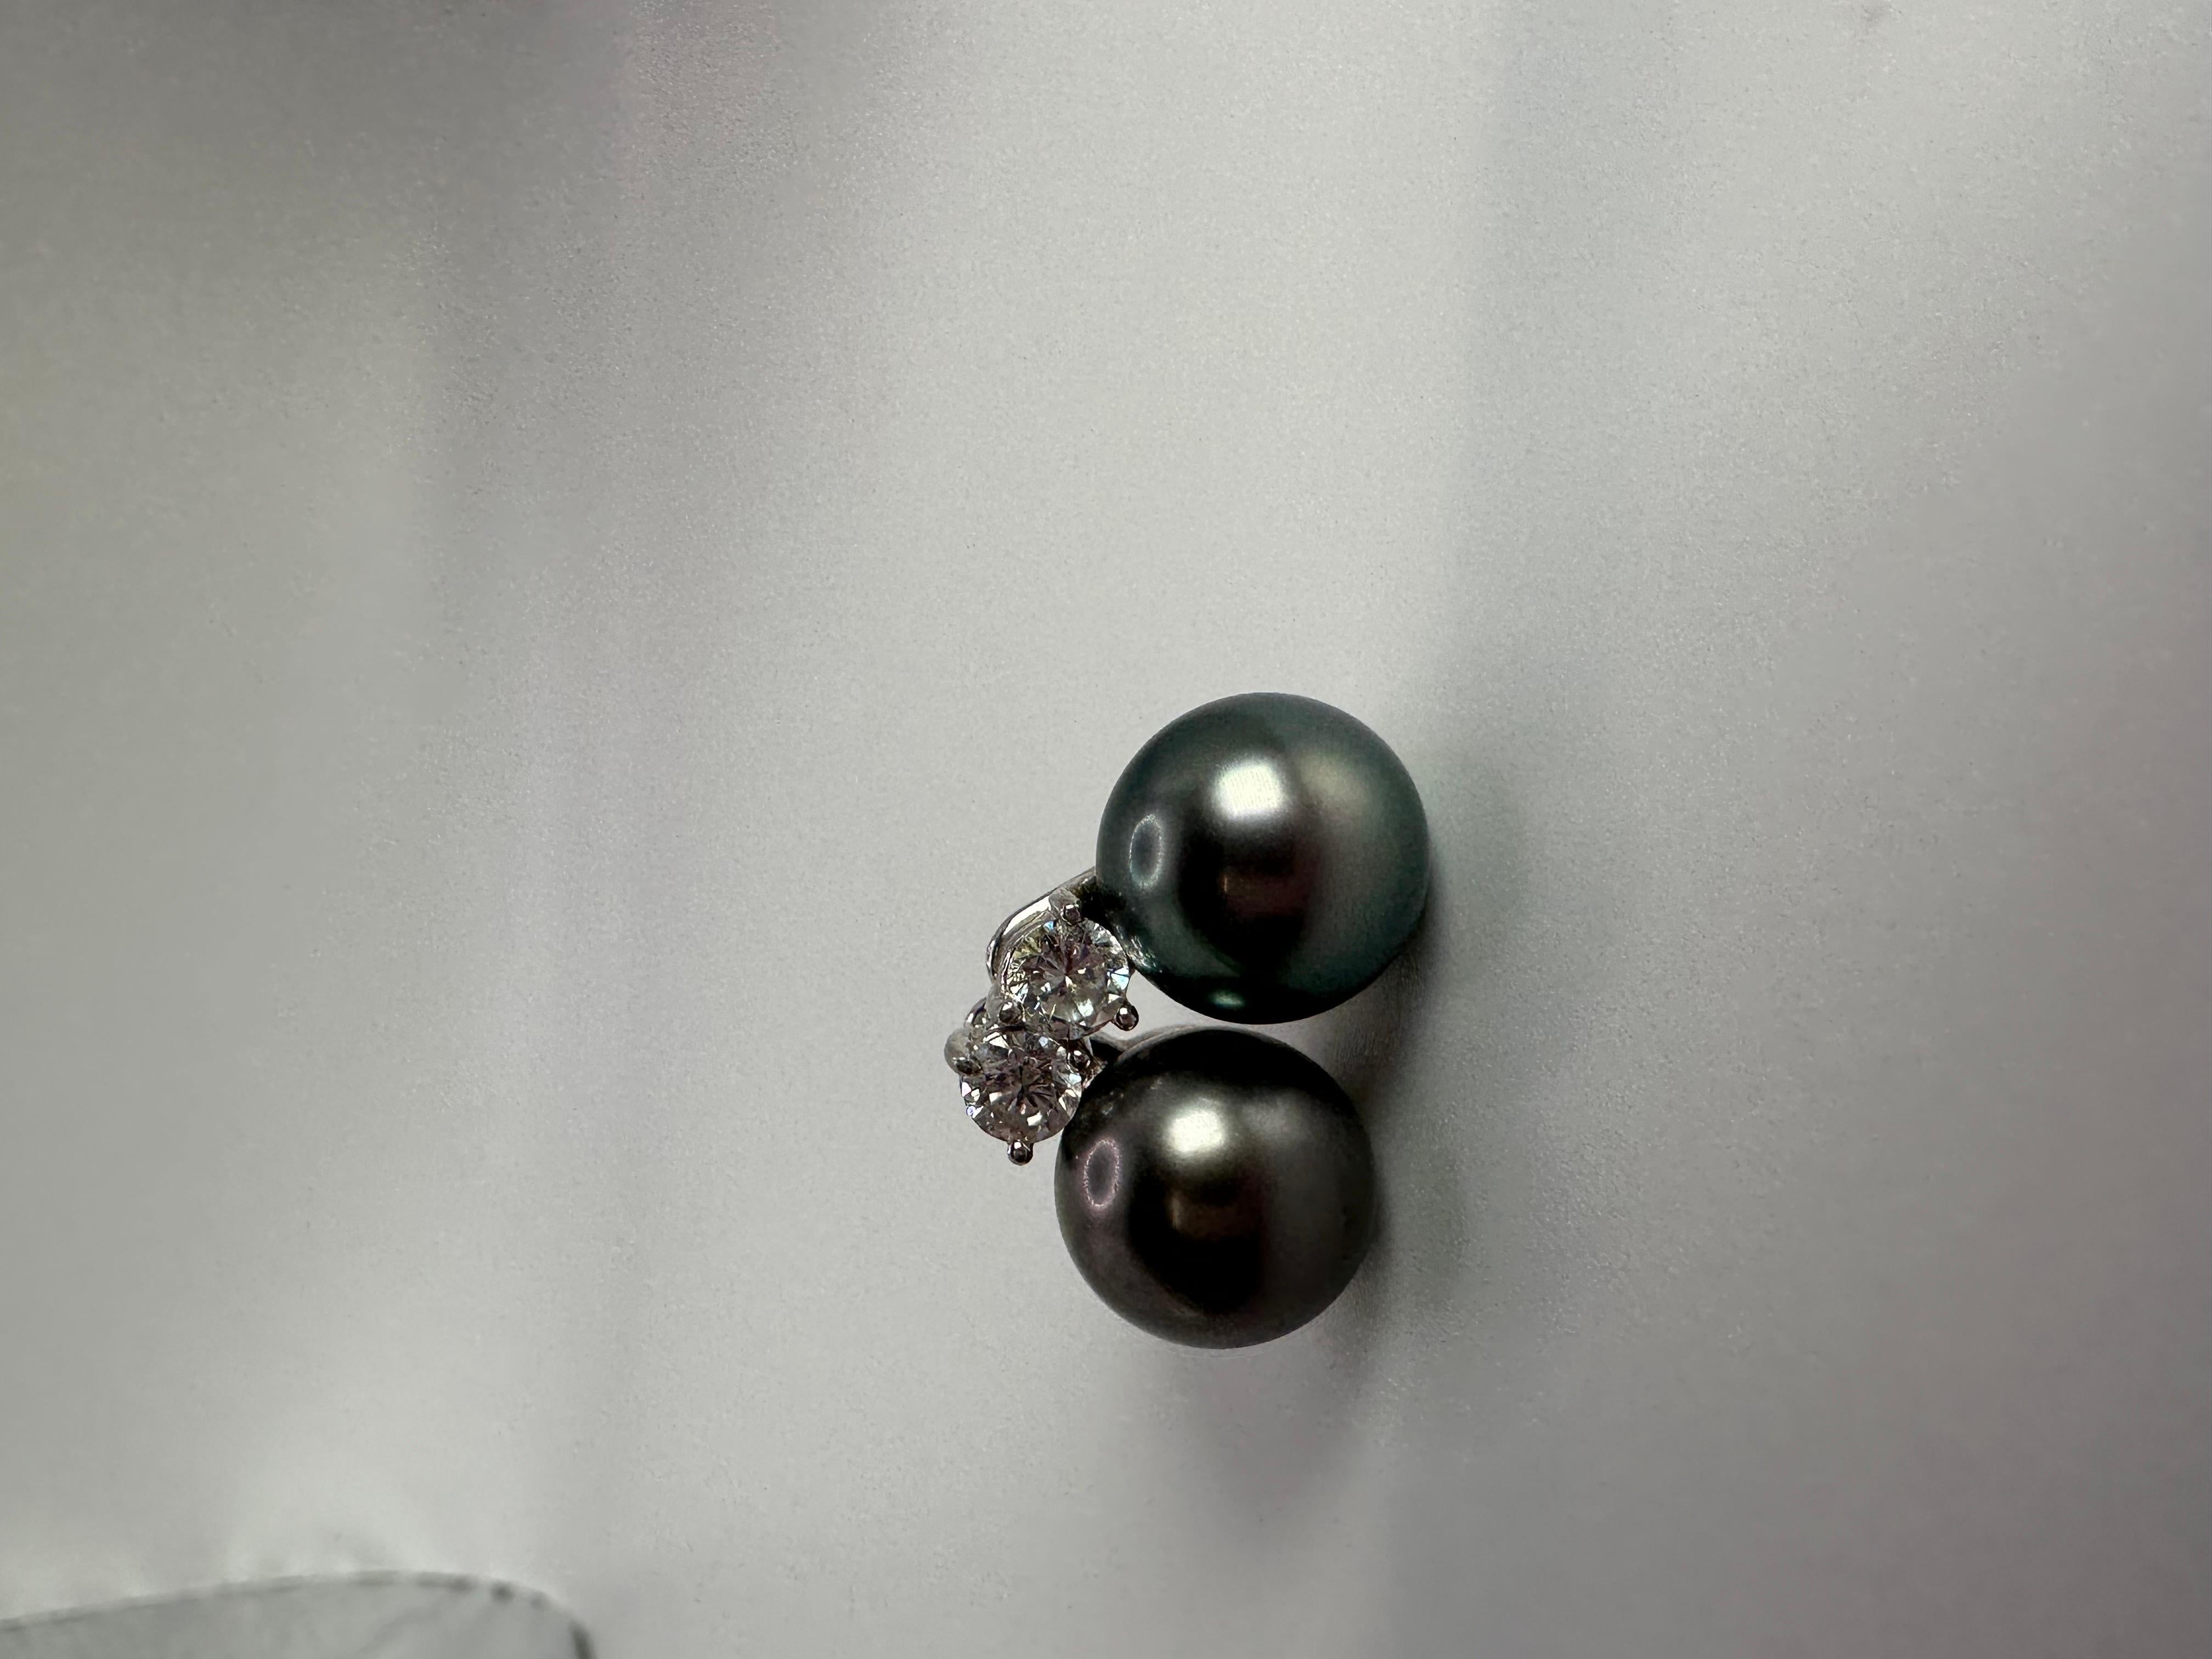 Stunning Tahitian pearl studs with 11mm pearls in 18KT white gold. The diamonds on top are approximately 0.30 carats each and the earrings have a stud closure. Pearls are natural not manmade or fabricated.

GOLD: 18KT
NATURAL